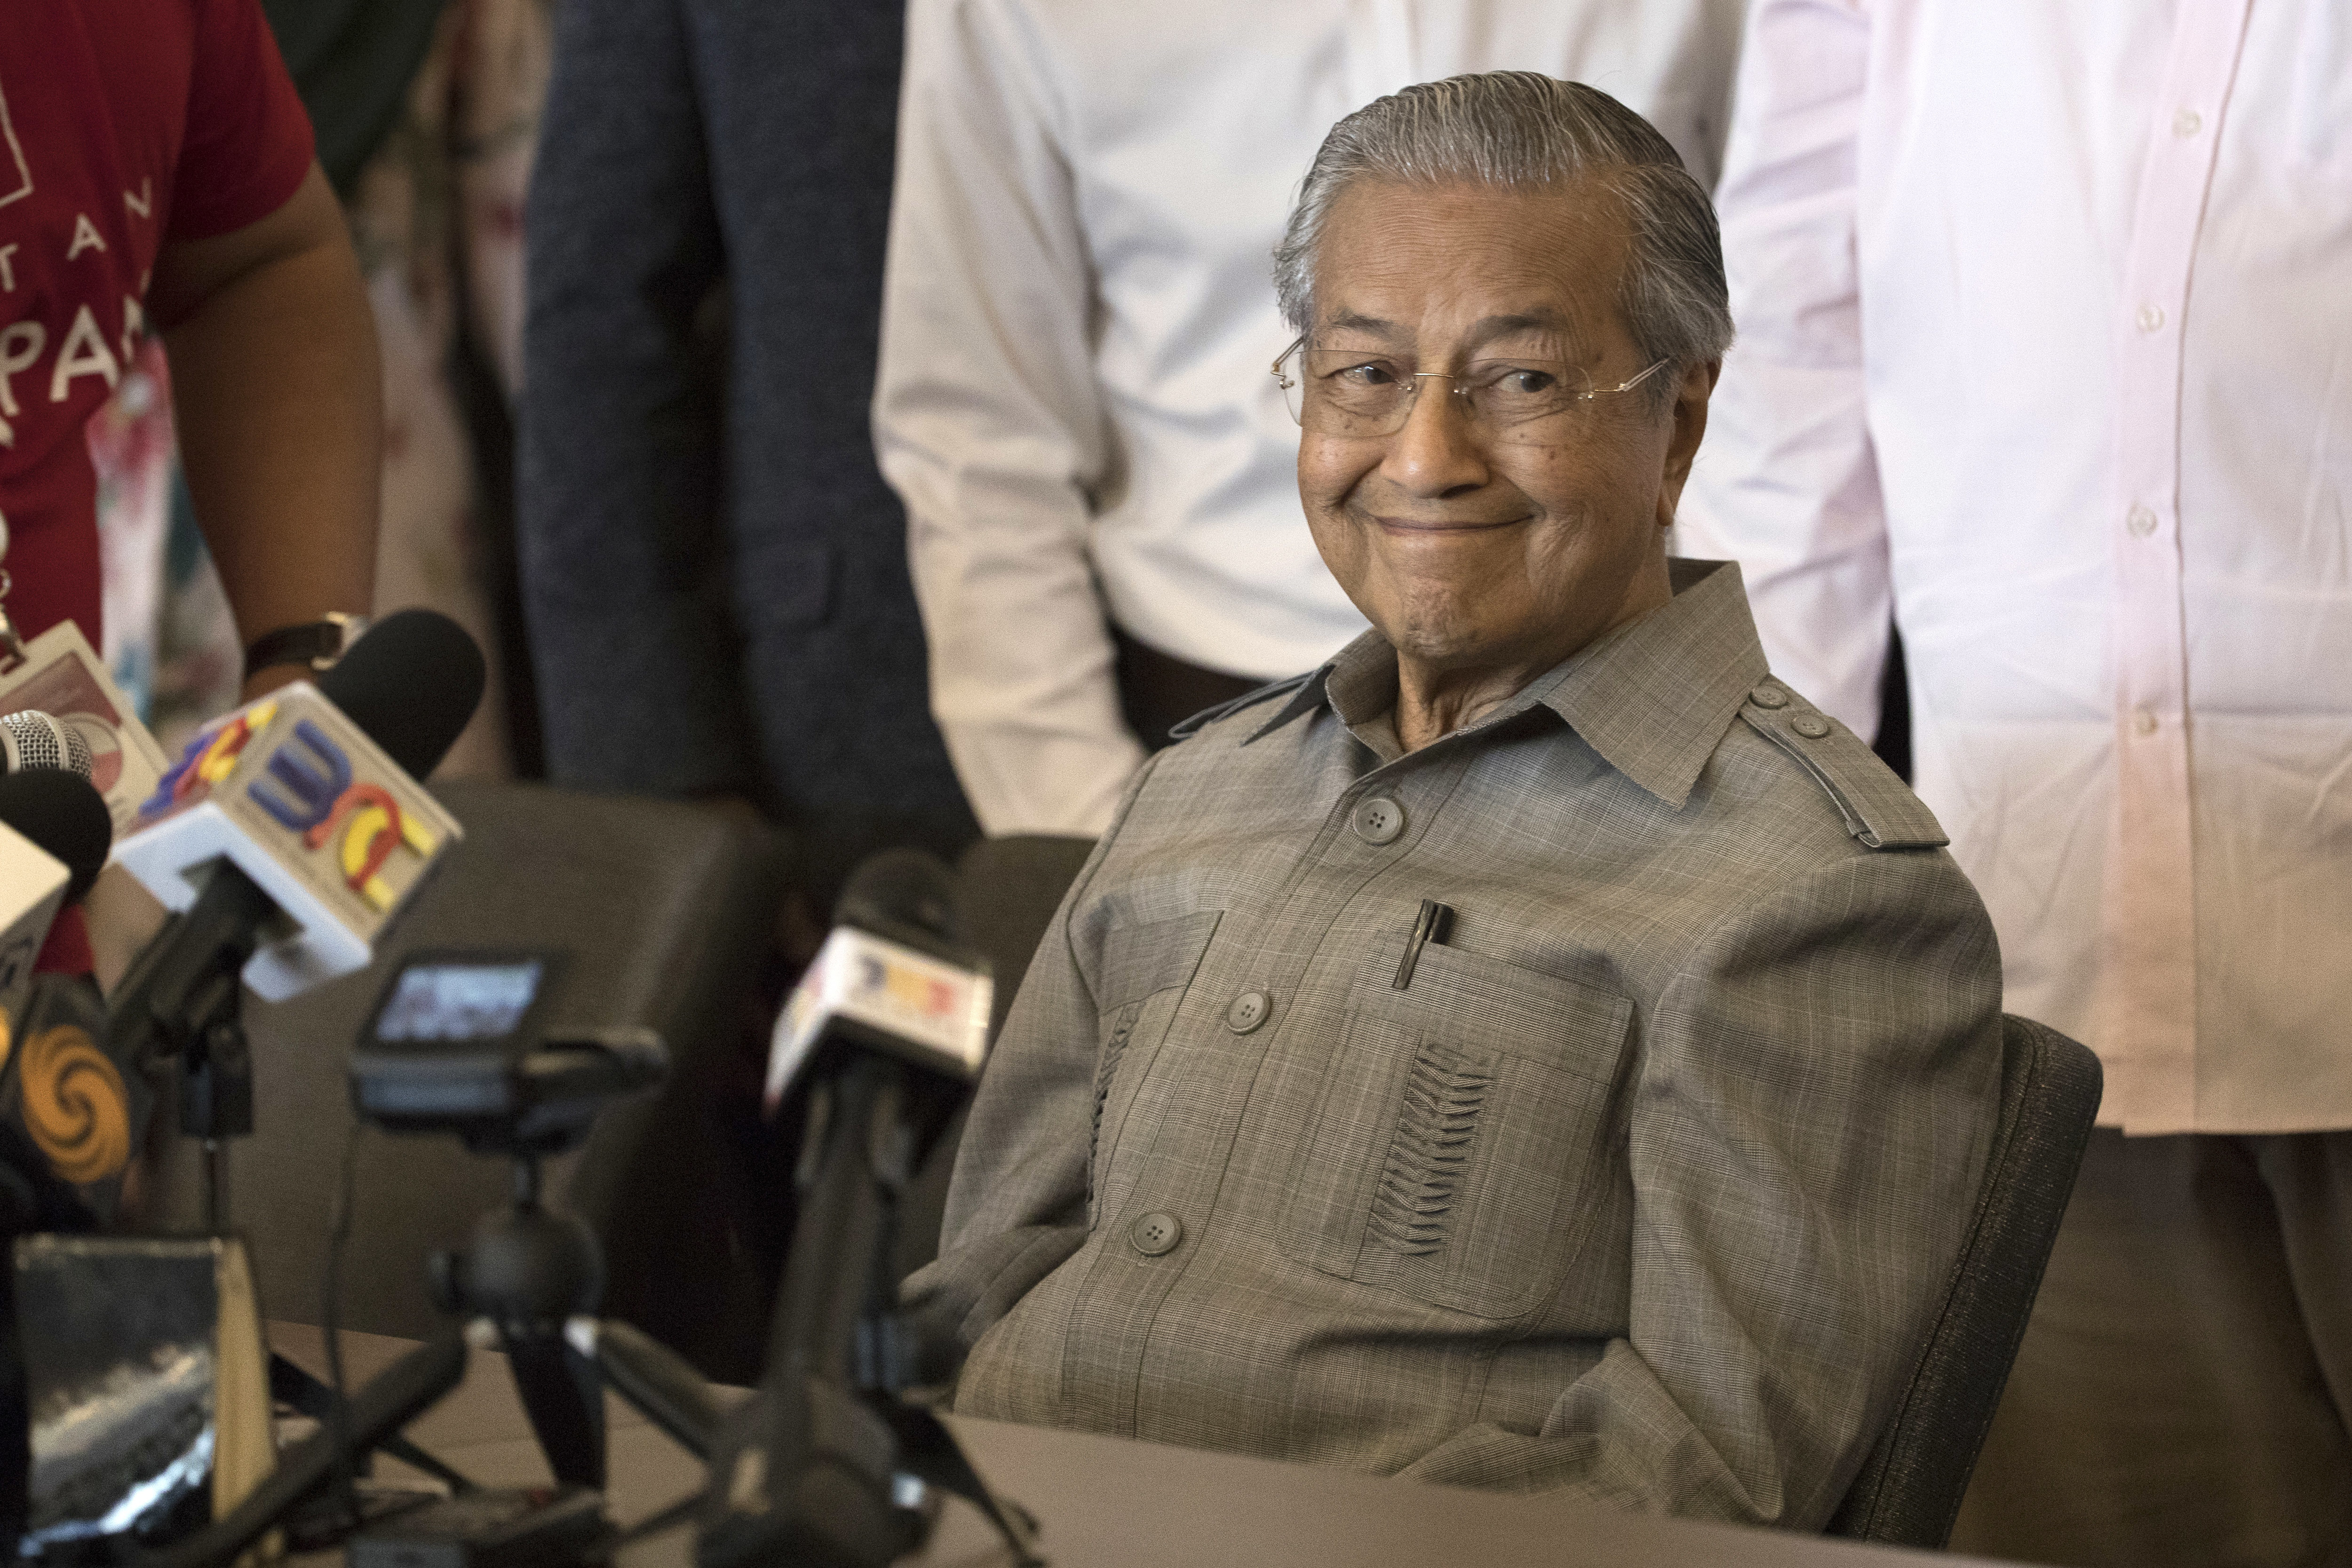 Mahathir Mohamad smiles during a press conference in Kuala Lumpur, Malaysia on Thursday, May 10, 2018. Mahathir says he expects to be sworn in as prime minister today. (AP Photo/Adrian Hoe)